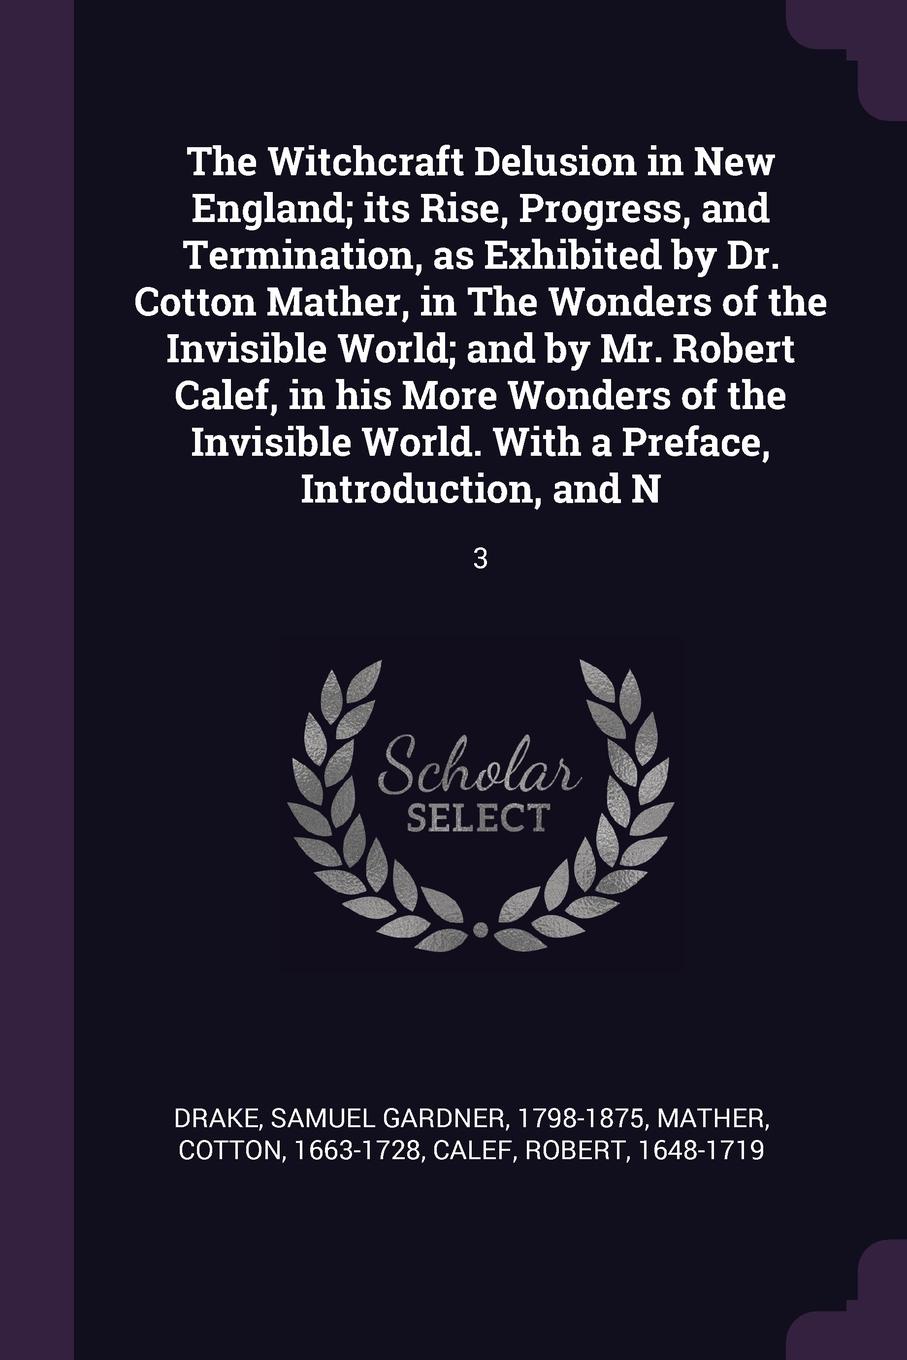 The Witchcraft Delusion in New England; its Rise, Progress, and Termination, as Exhibited by Dr. Cotton Mather, in The Wonders of the Invisible World; and by Mr. Robert Calef, in his More Wonders of the Invisible World. With a Preface, Introductio...